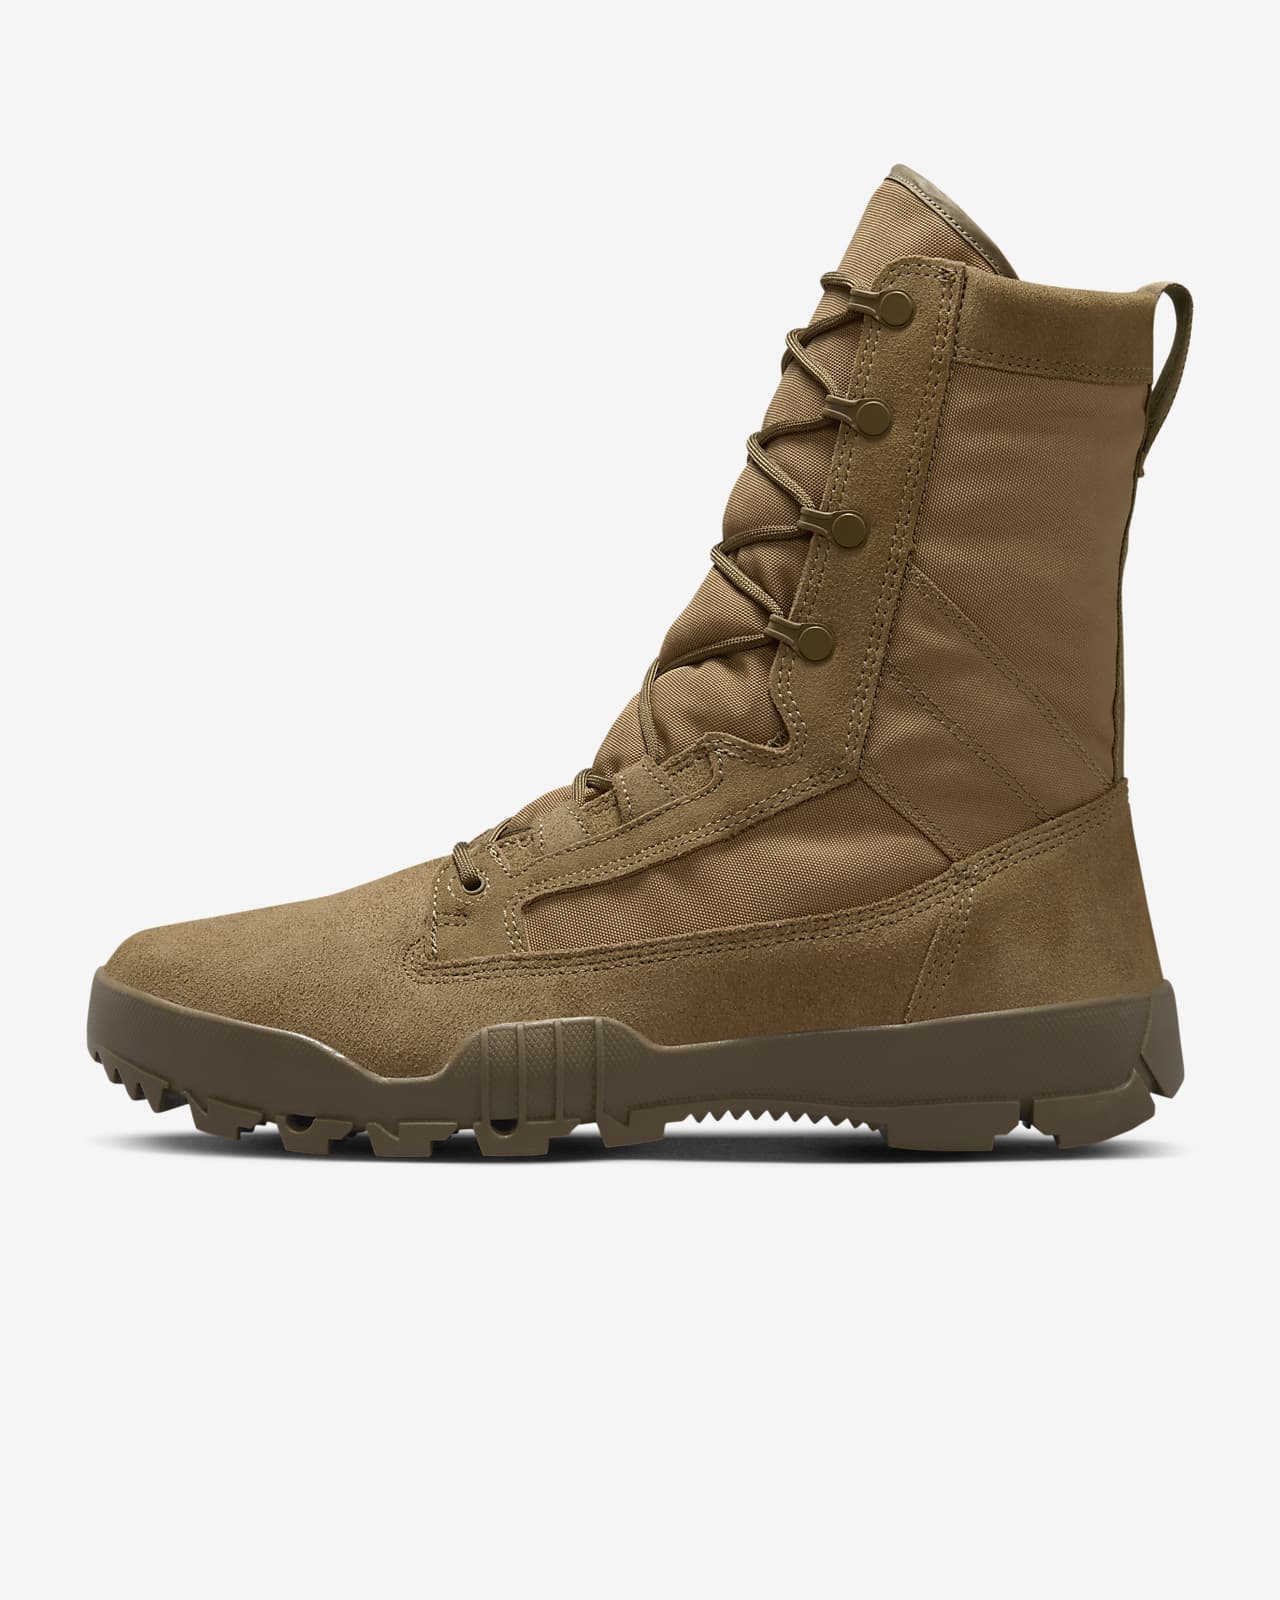 Nike 8" Leather Tactical Boots.